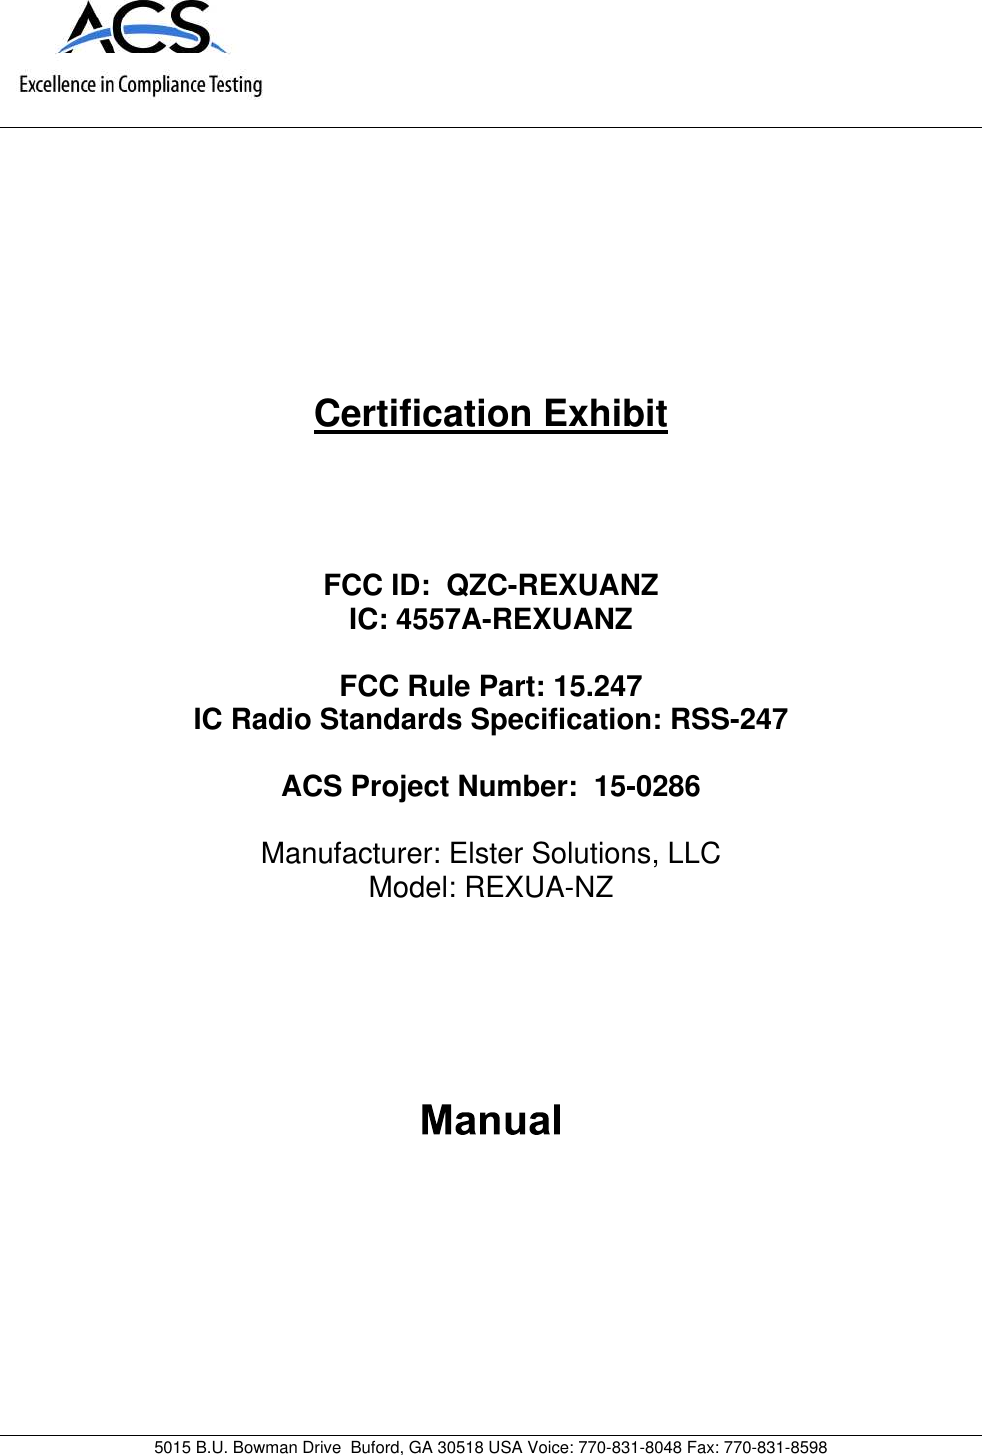 5015 B.U. Bowman Drive Buford, GA 30518 USA Voice: 770-831-8048 Fax: 770-831-8598Certification ExhibitFCC ID: QZC-REXUANZIC: 4557A-REXUANZFCC Rule Part: 15.247IC Radio Standards Specification: RSS-247ACS Project Number: 15-0286Manufacturer: Elster Solutions, LLCModel: REXUA-NZ